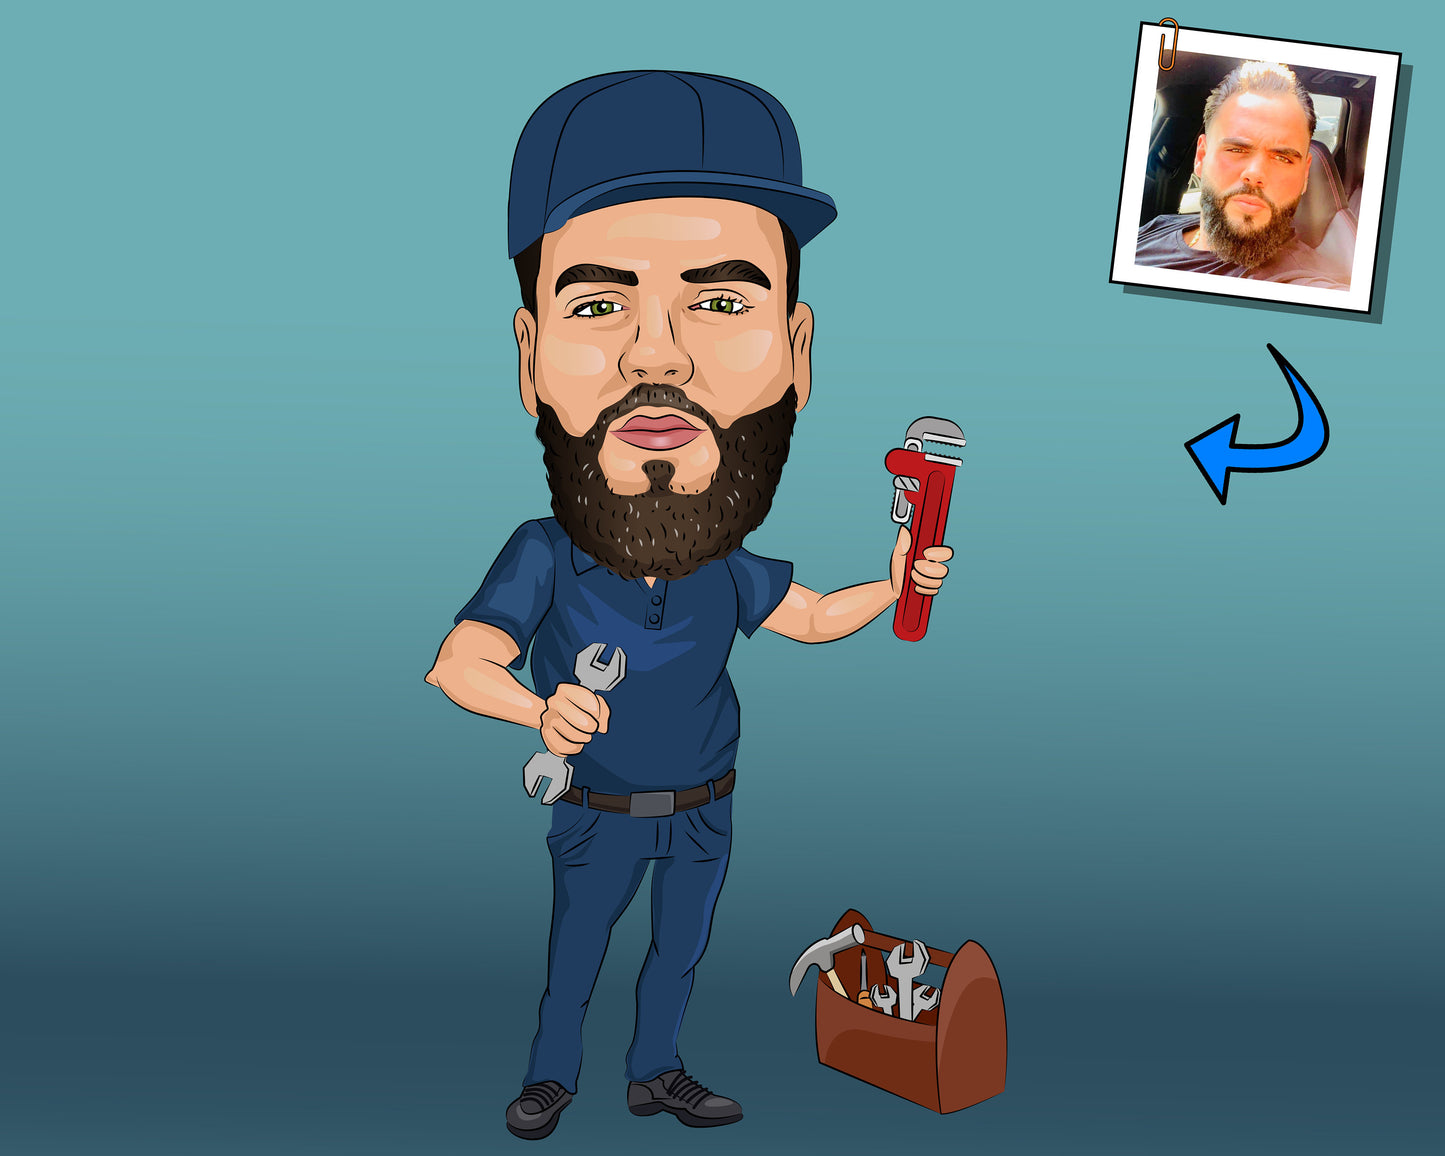 Mechanic Gift - Custom Caricature Portrait From Your Photo/mechanical engineer gift